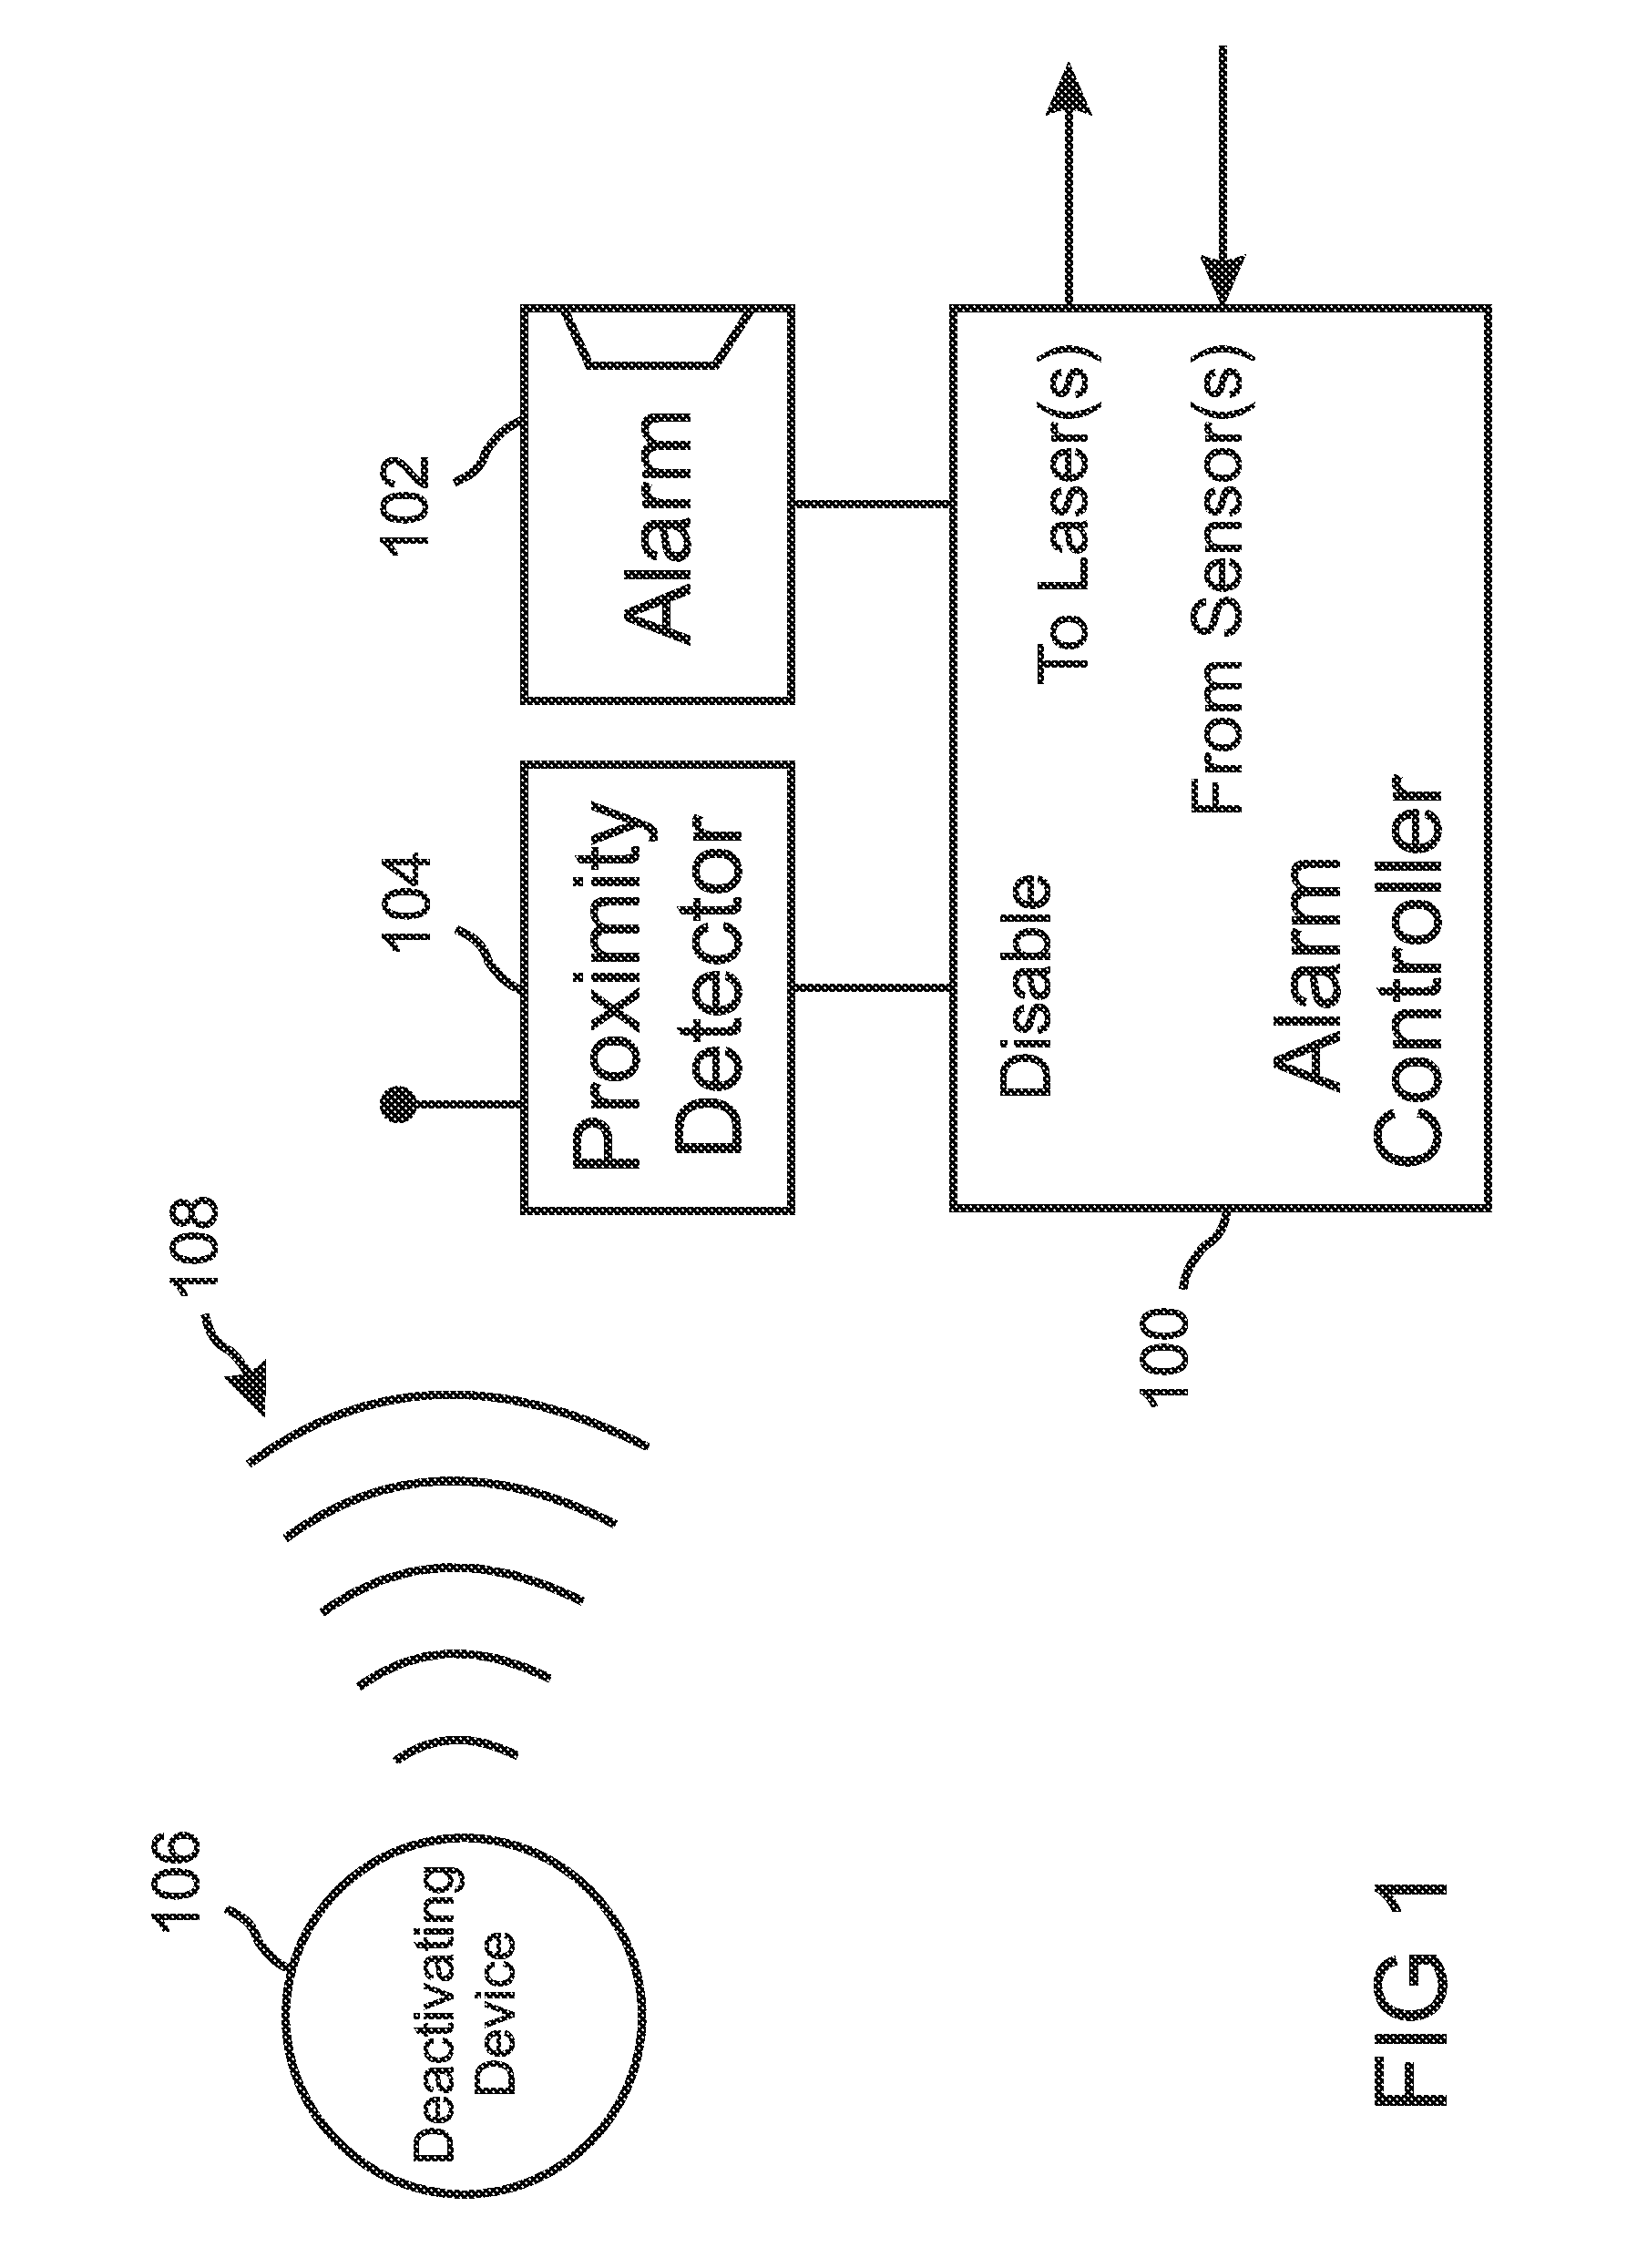 Light-curtain alarm with proximity-detected access authorization